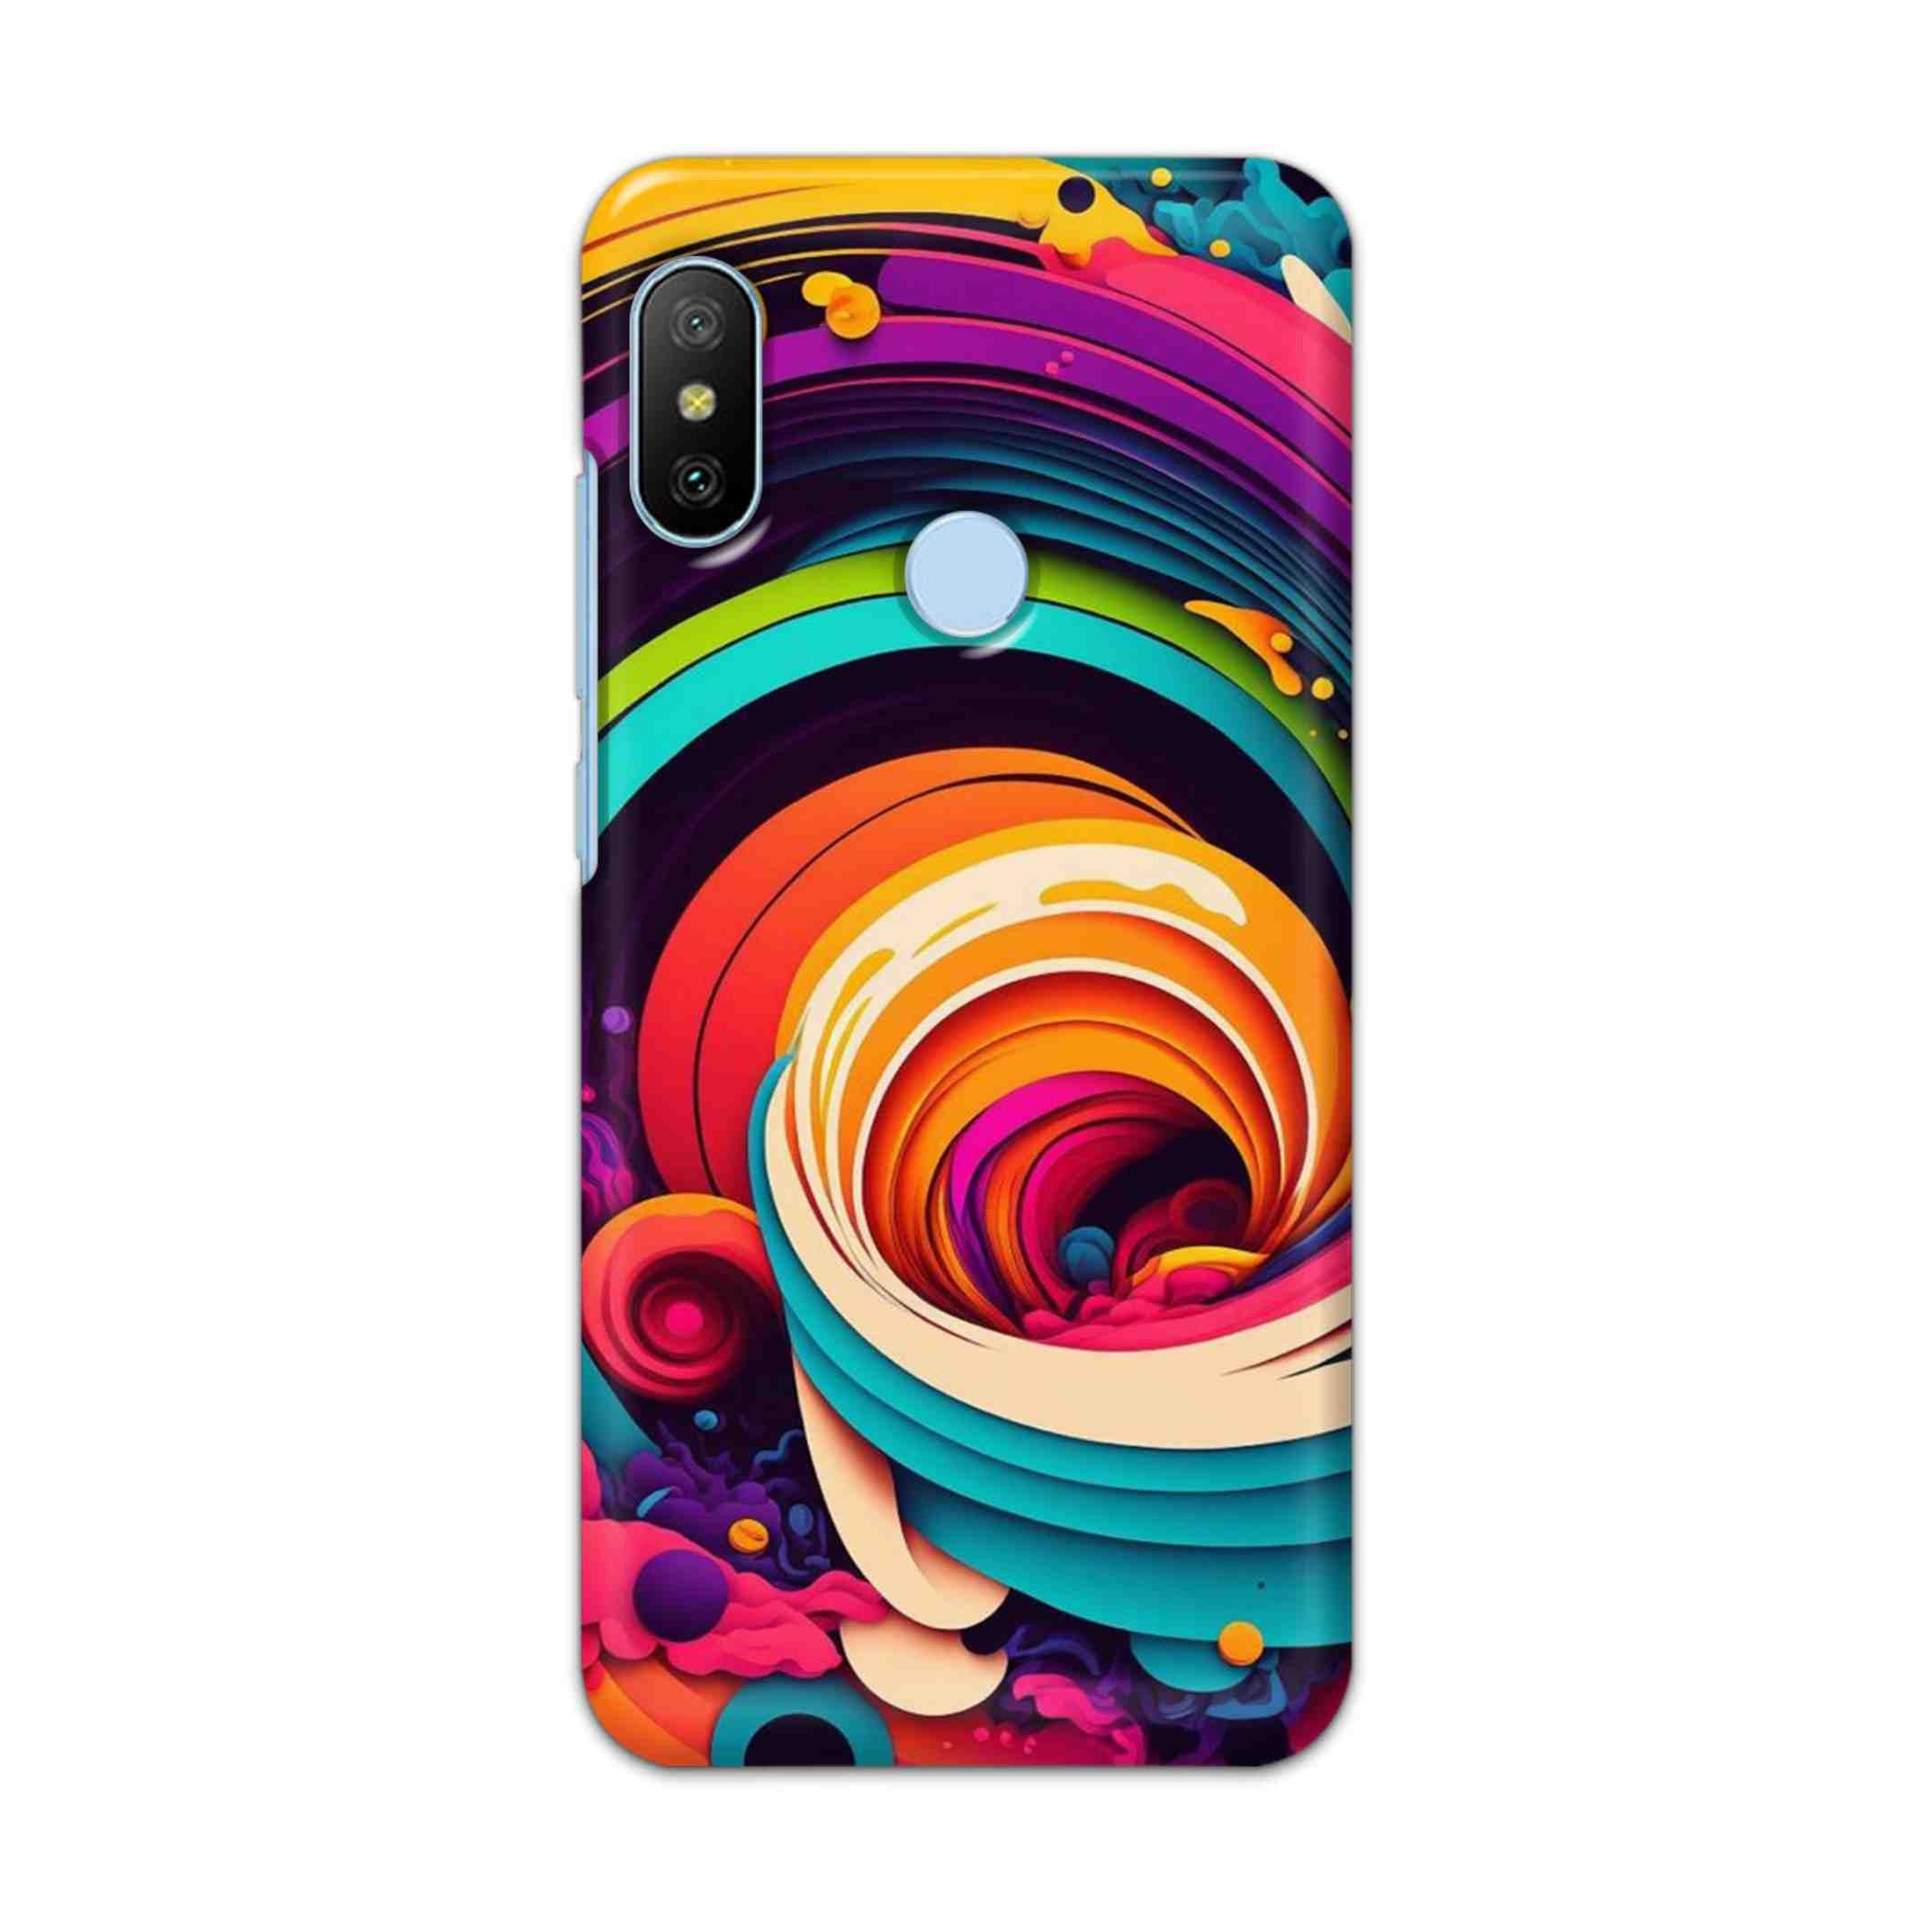 Buy Colour Circle Hard Back Mobile Phone Case/Cover For Xiaomi Redmi 6 Pro Online